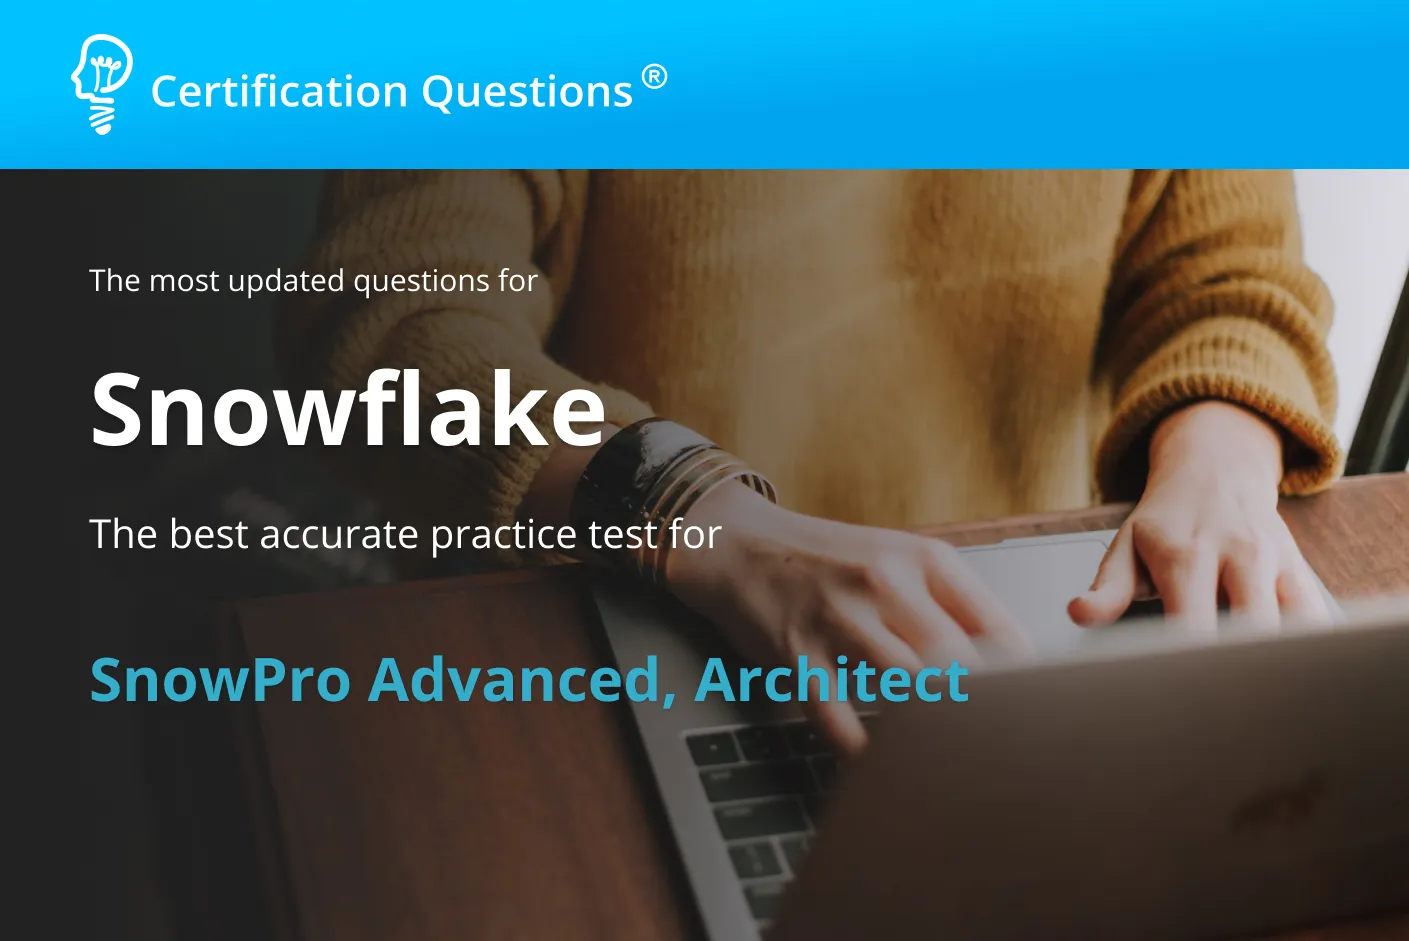 This image is related to the SnowPro Advanced Architect Certification in the United States